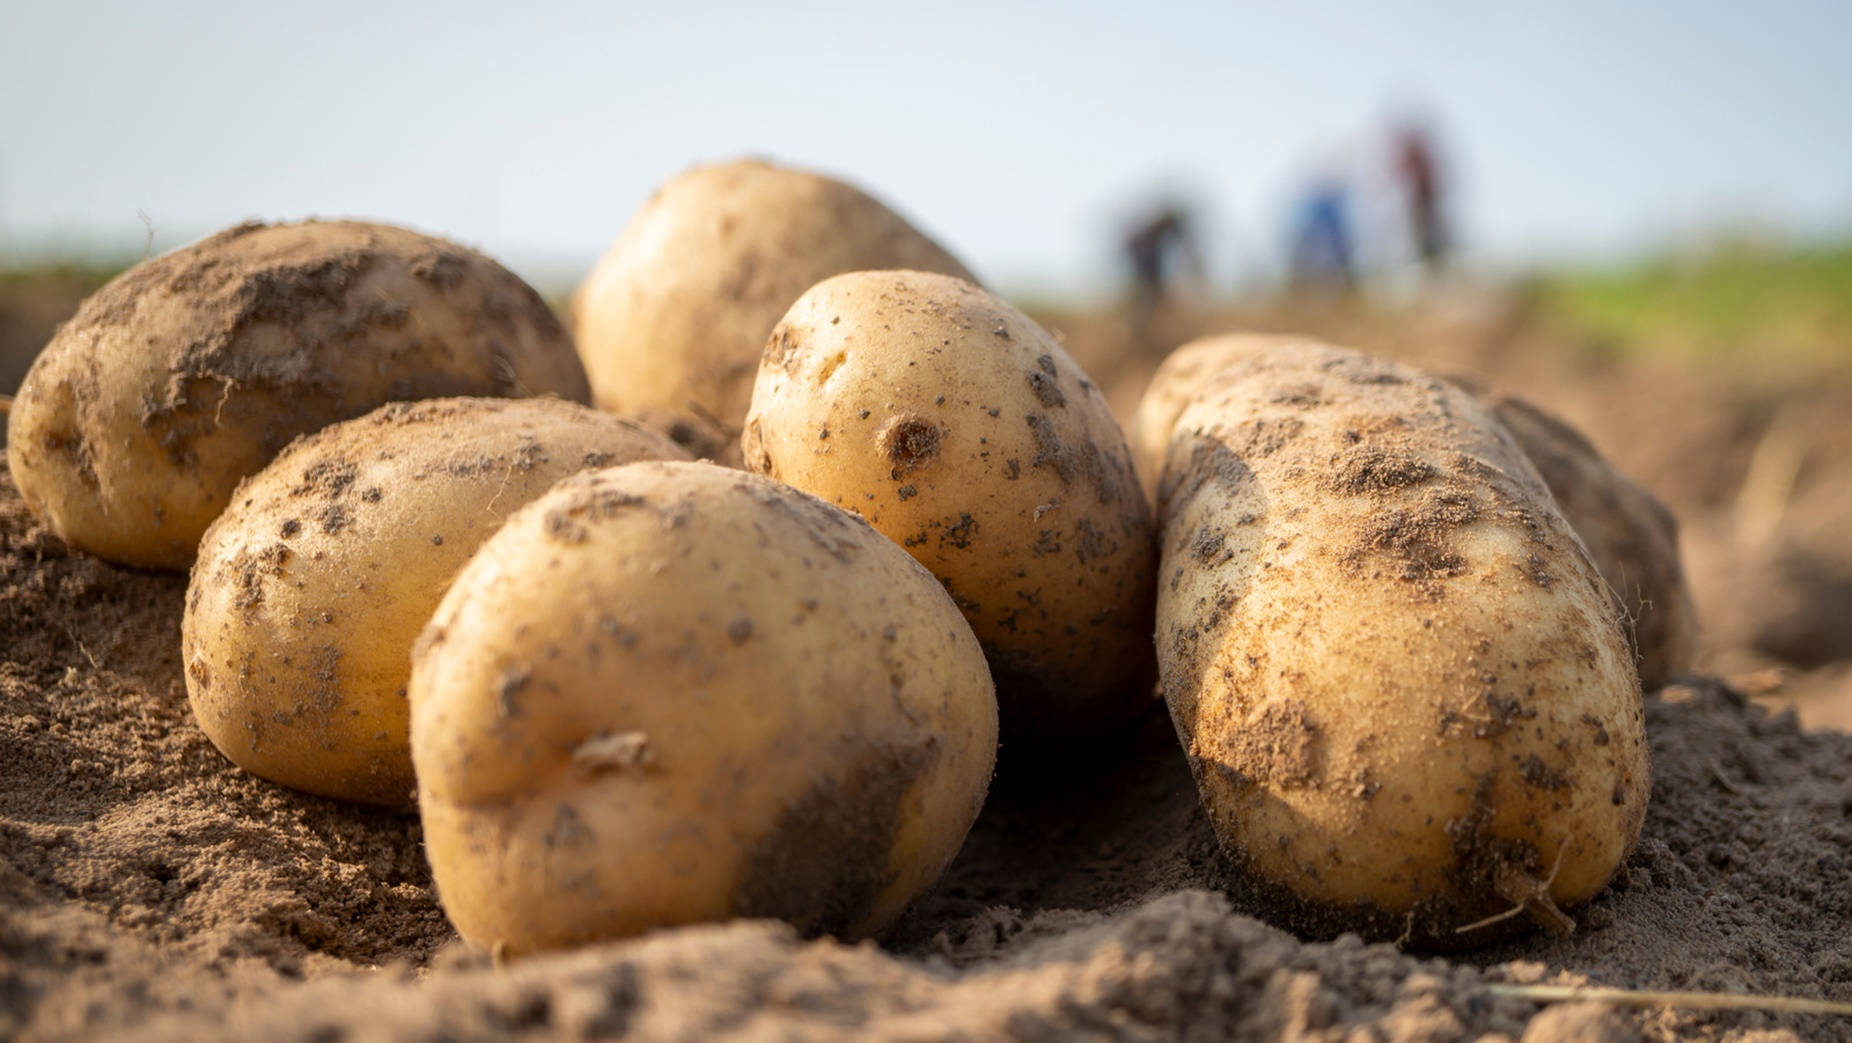 100 Potato Pictures  Download Free Images on Unsplash